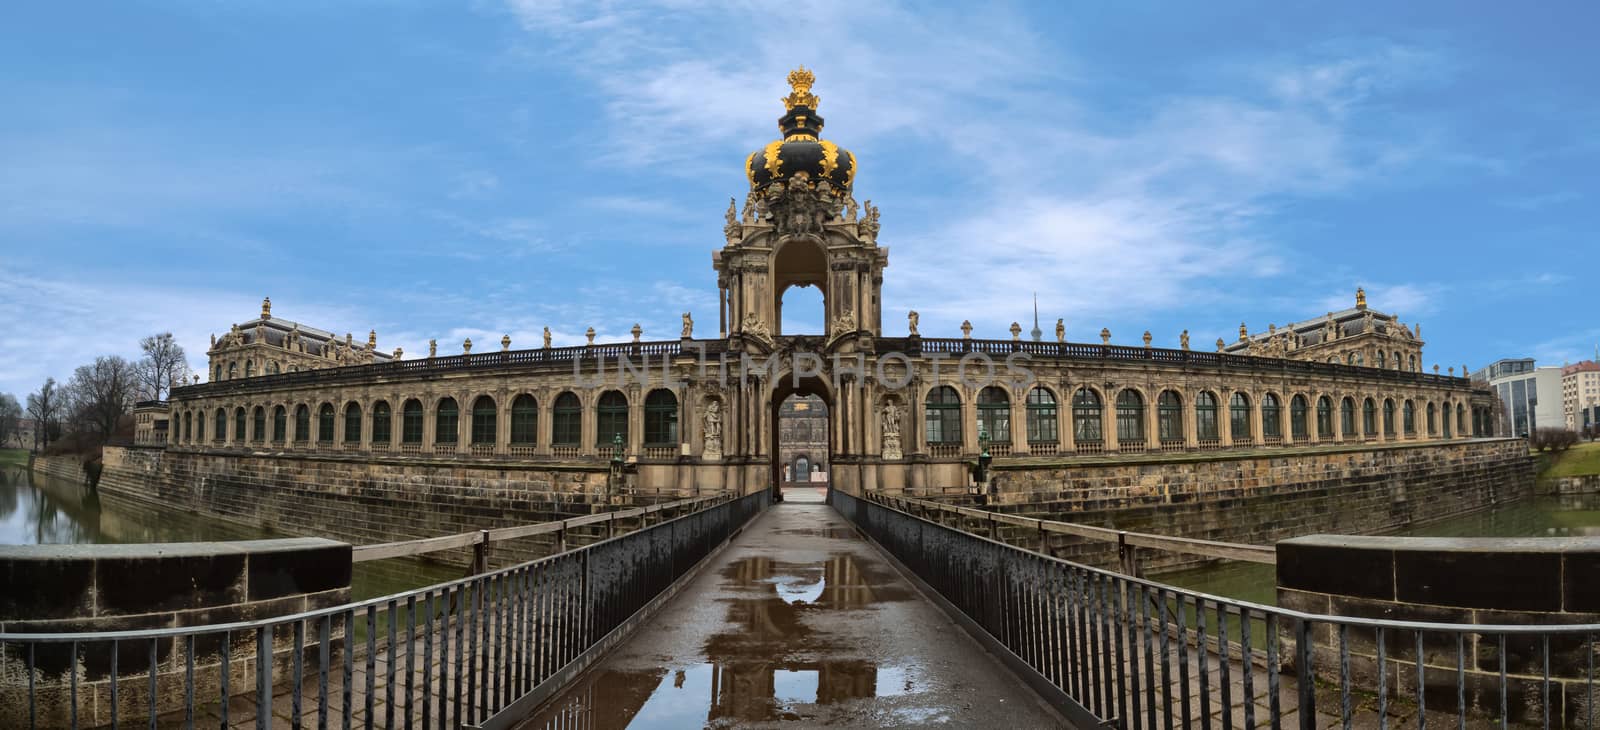 Situated in the heart of the Saxon state capital, the Dresden Zwinger is among the most well-known baroque buildings of Germany.